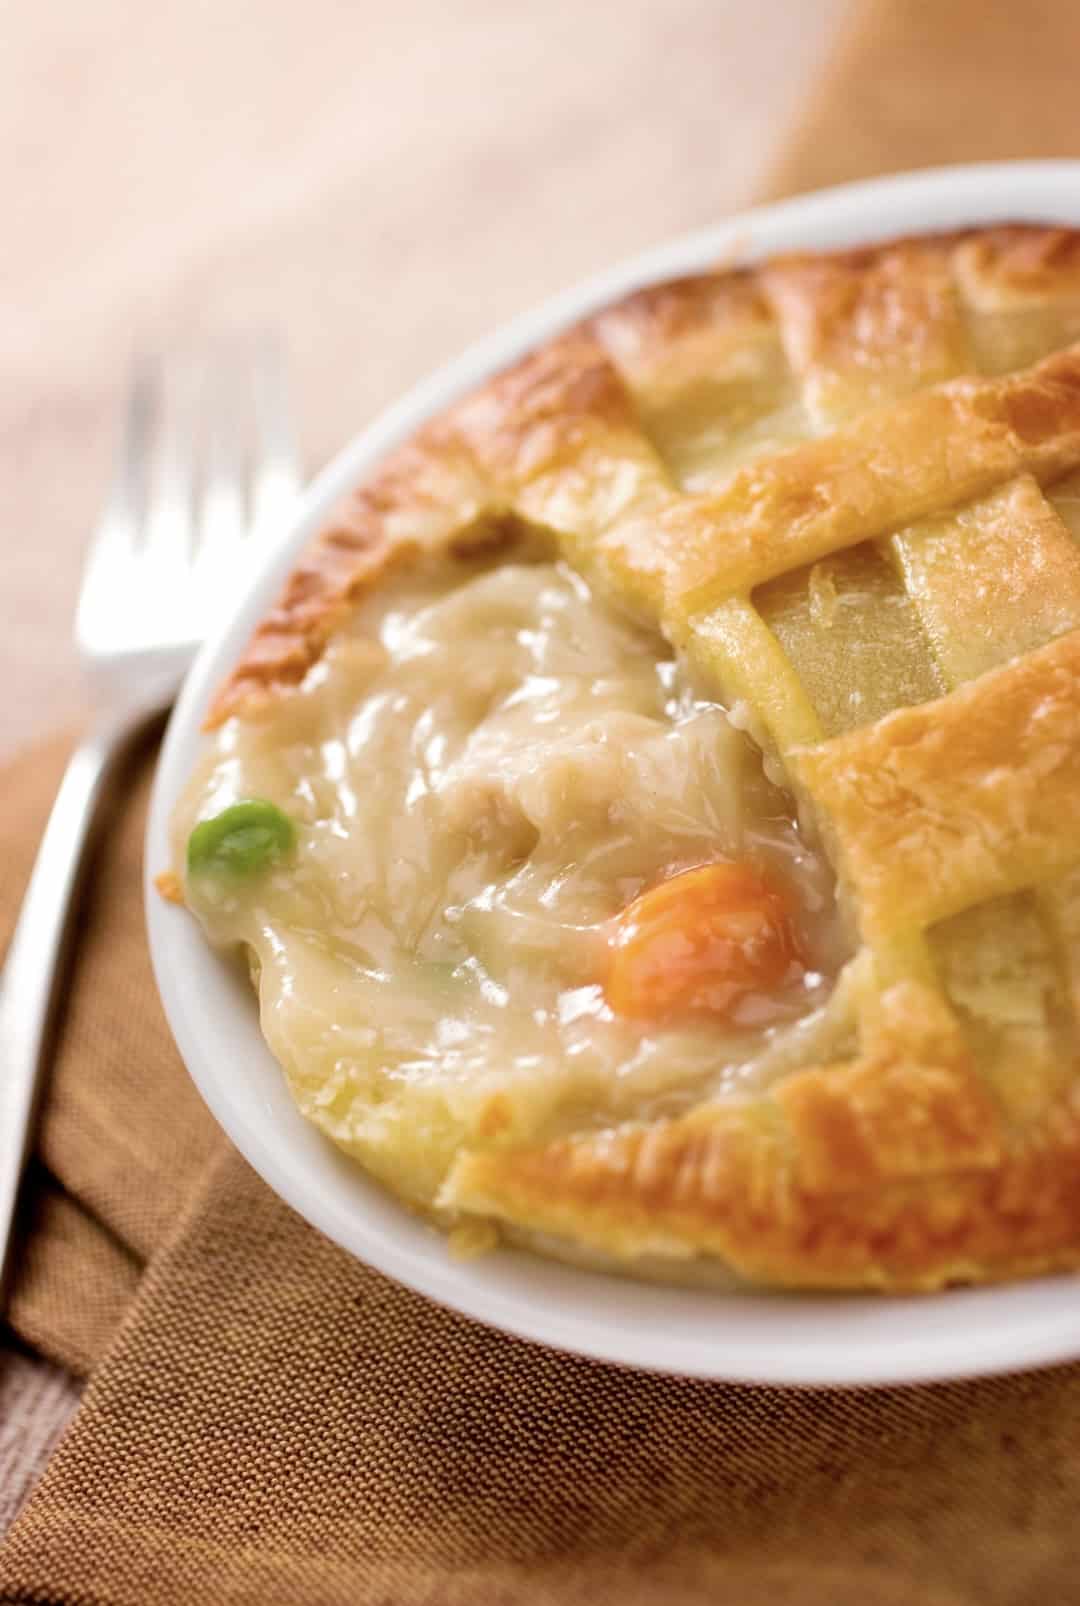 Classic chicken pot pie with a crust.